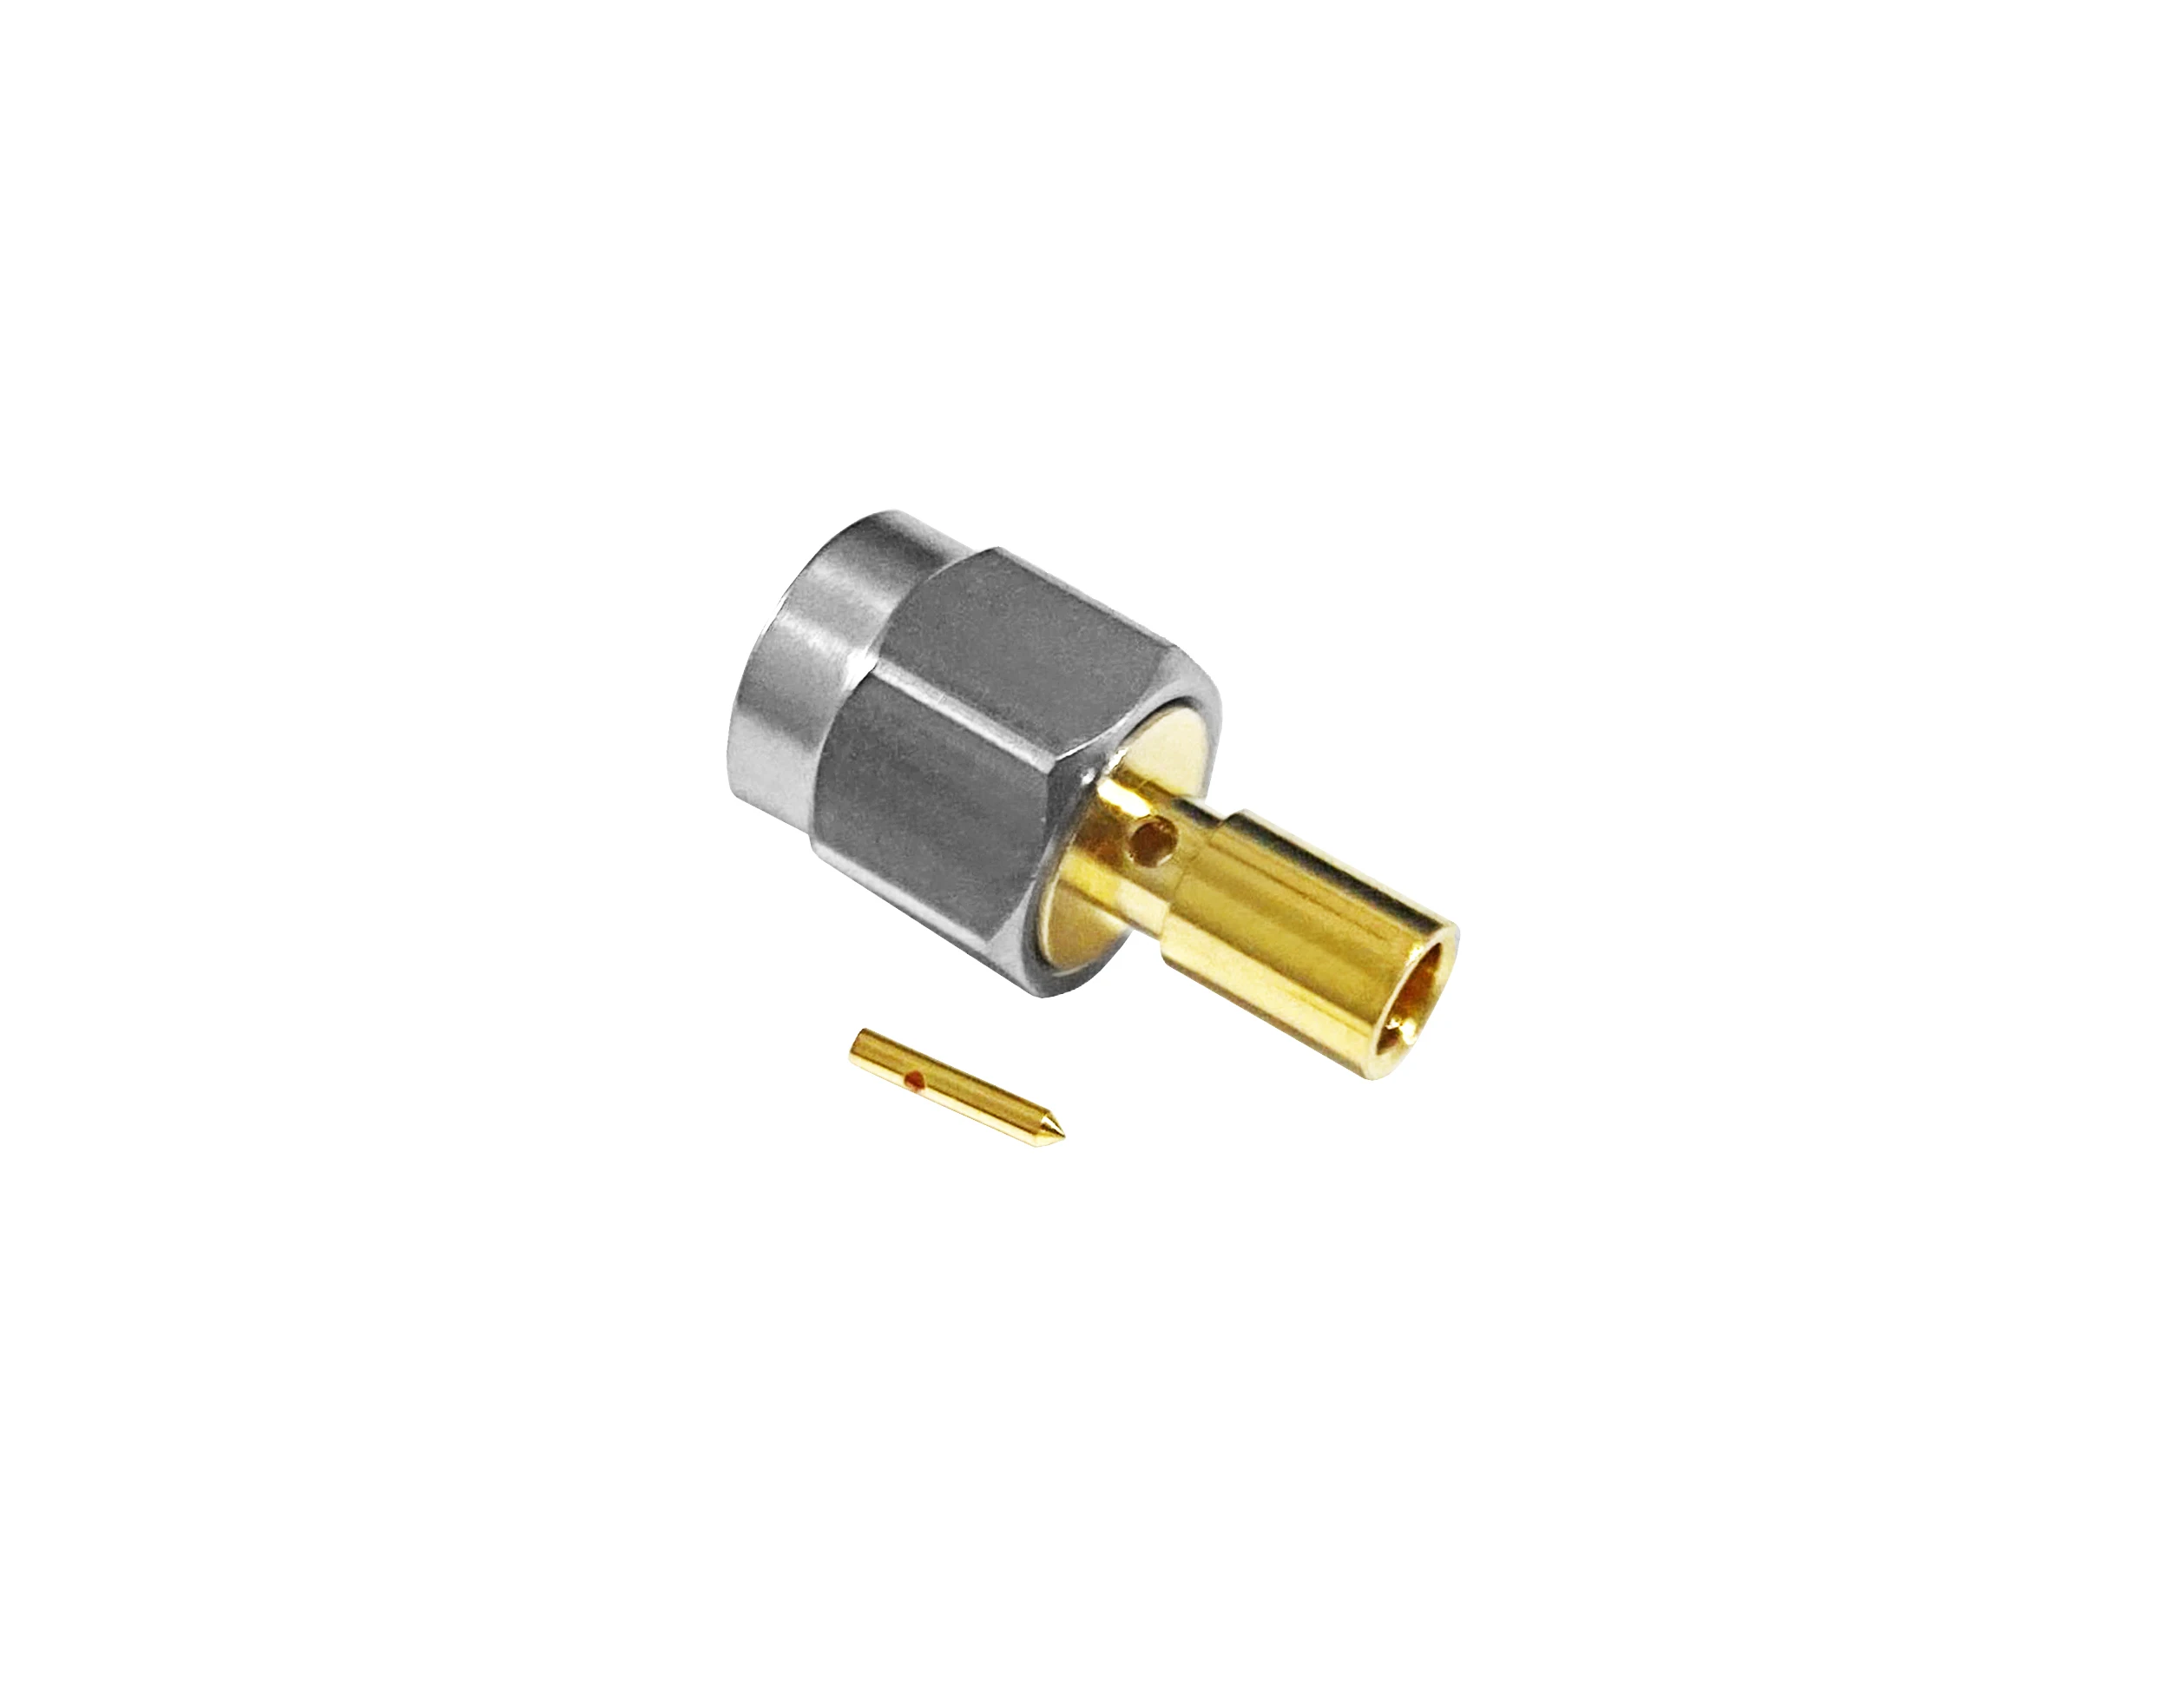 RF connector SMA type male pin straight crimp for 086 RF coaxial cable plug with stainless steel